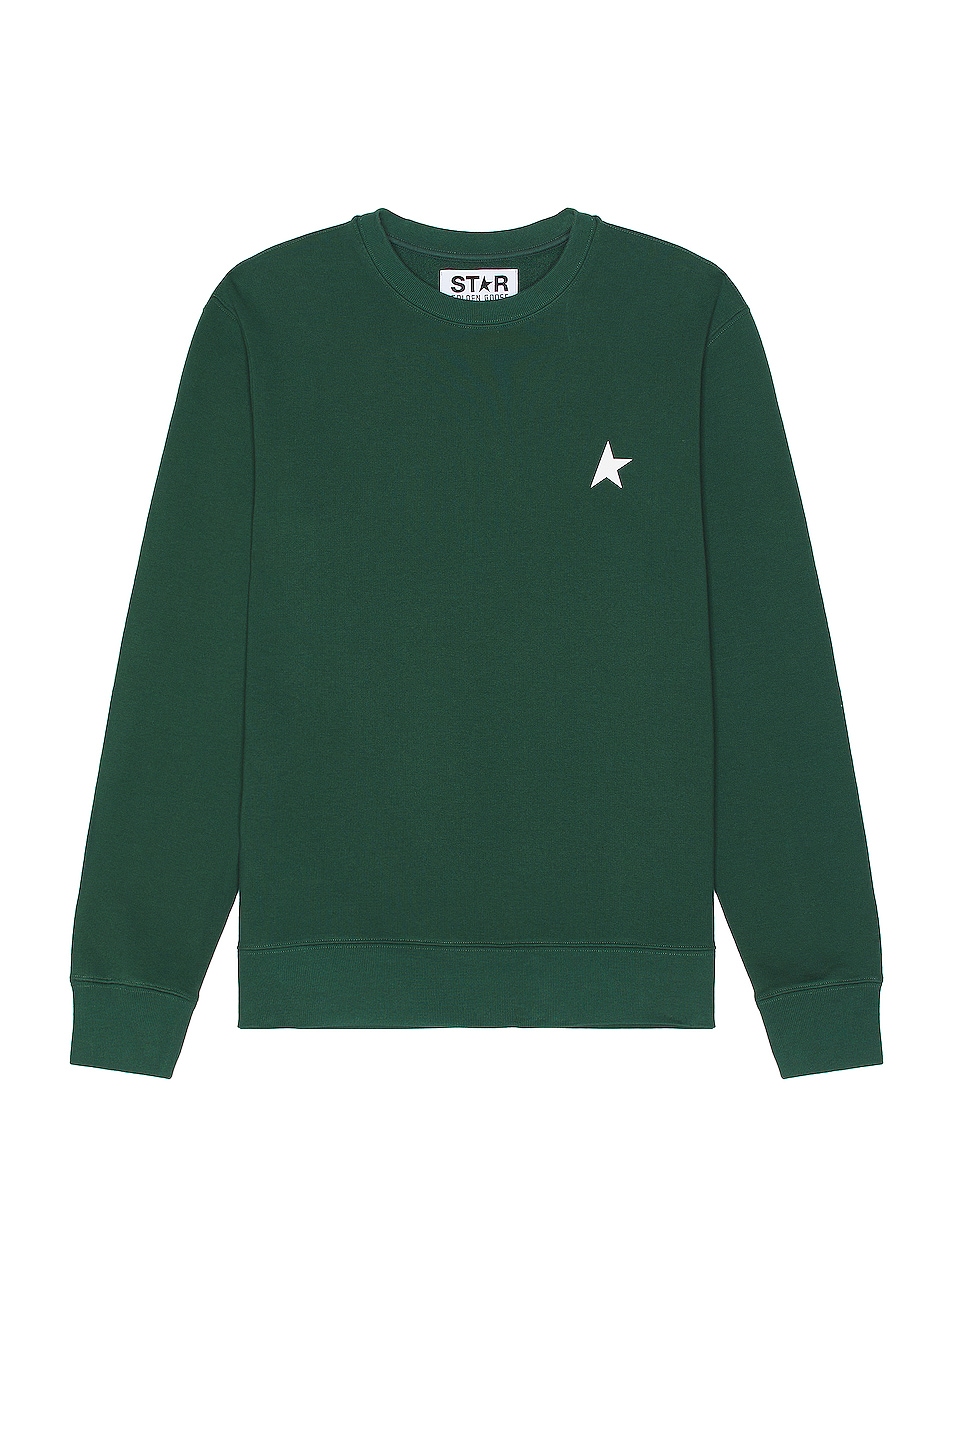 Image 1 of Golden Goose Archibald Sweater in Bright Green & White